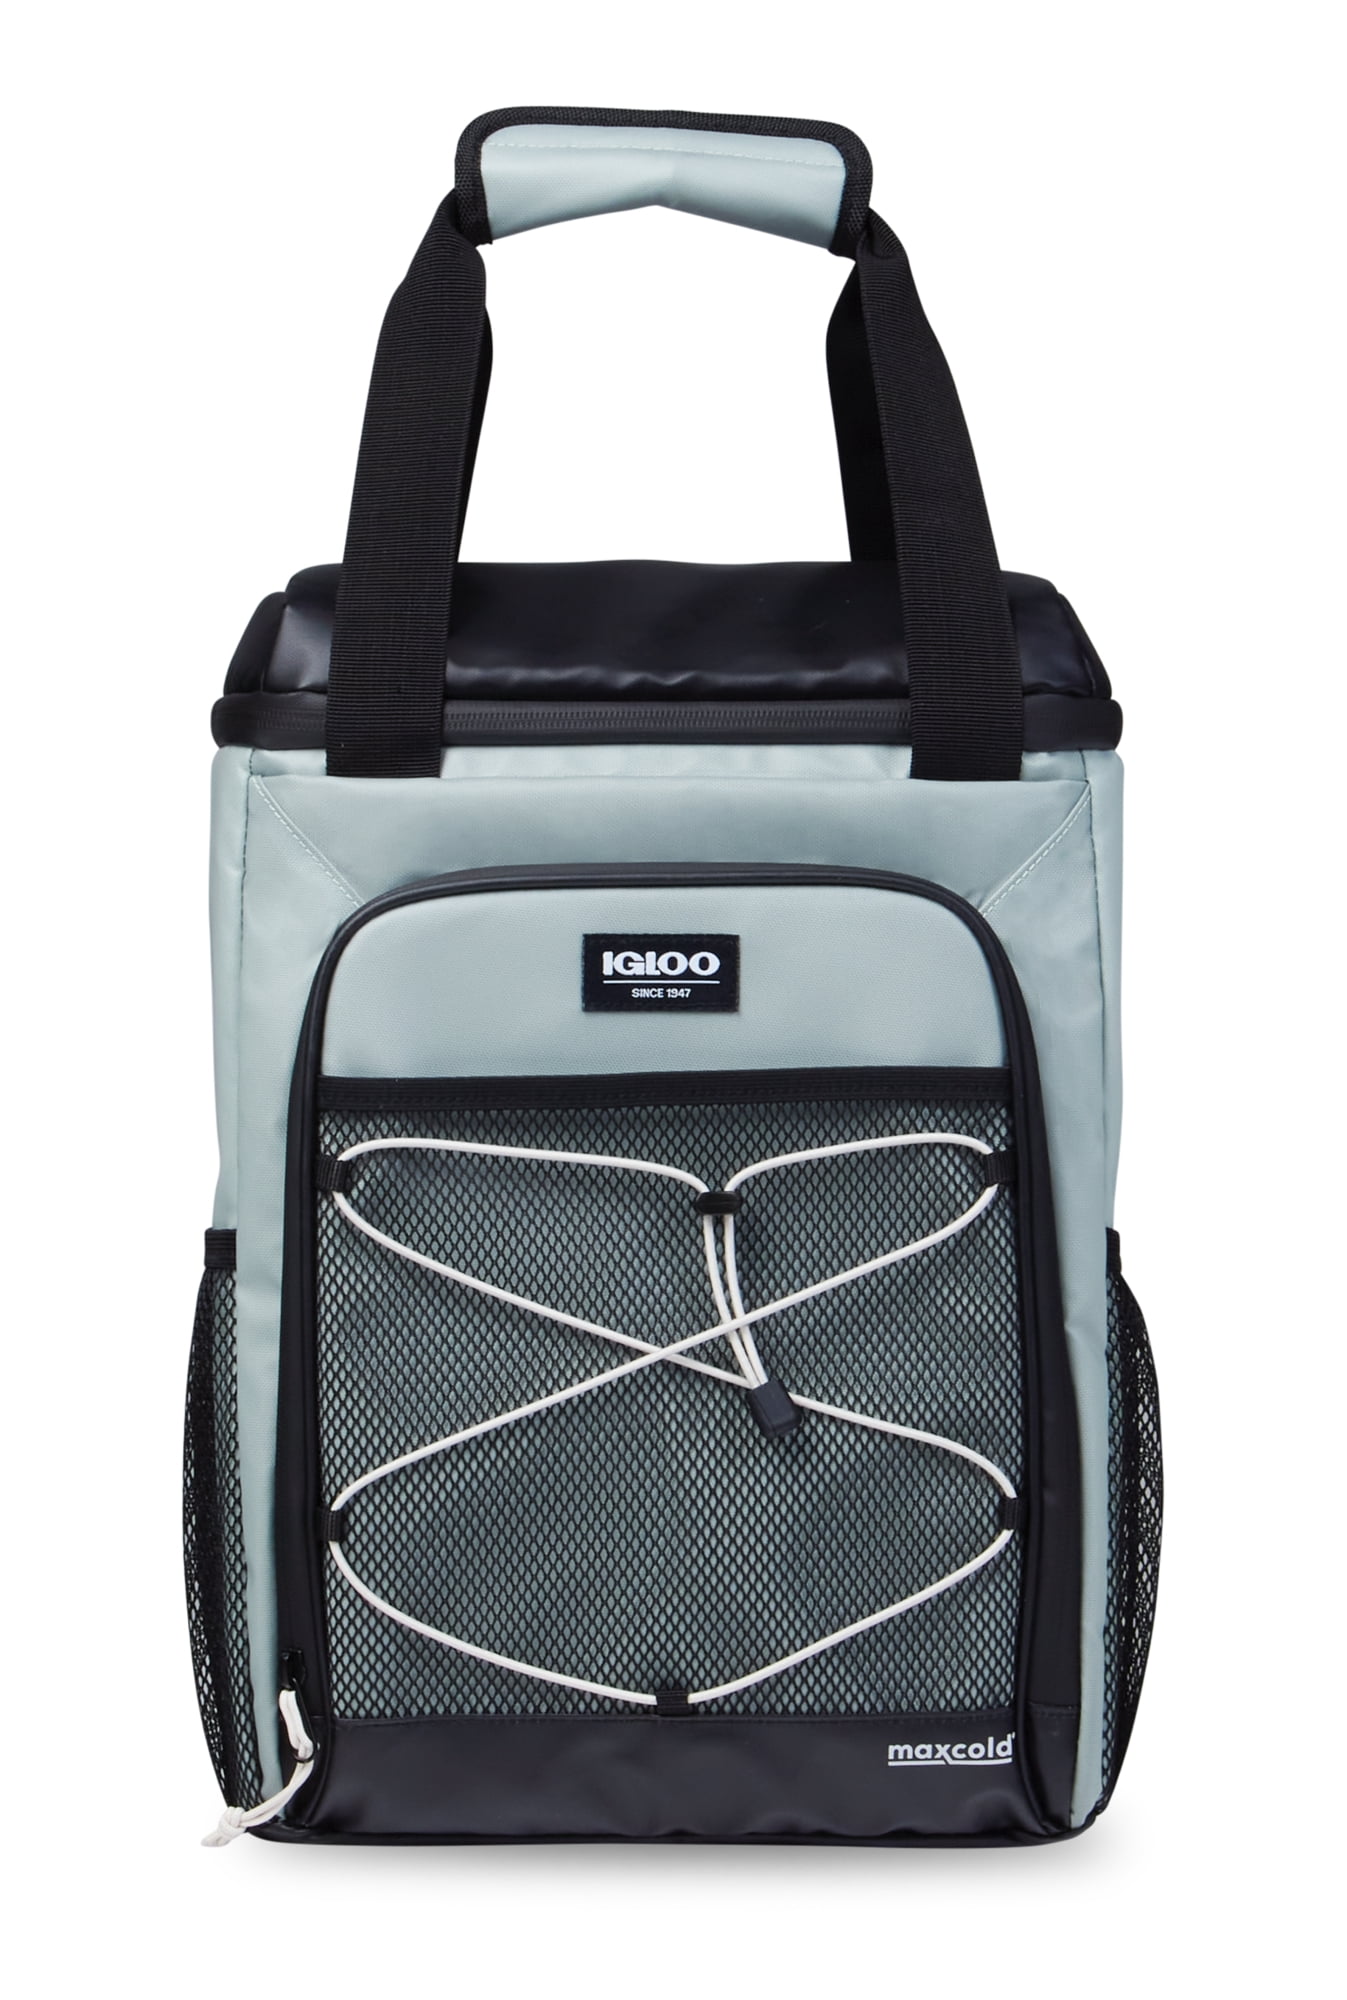 Igloo Overland 28 cans Durable Backpack Softsided Cooler, Green